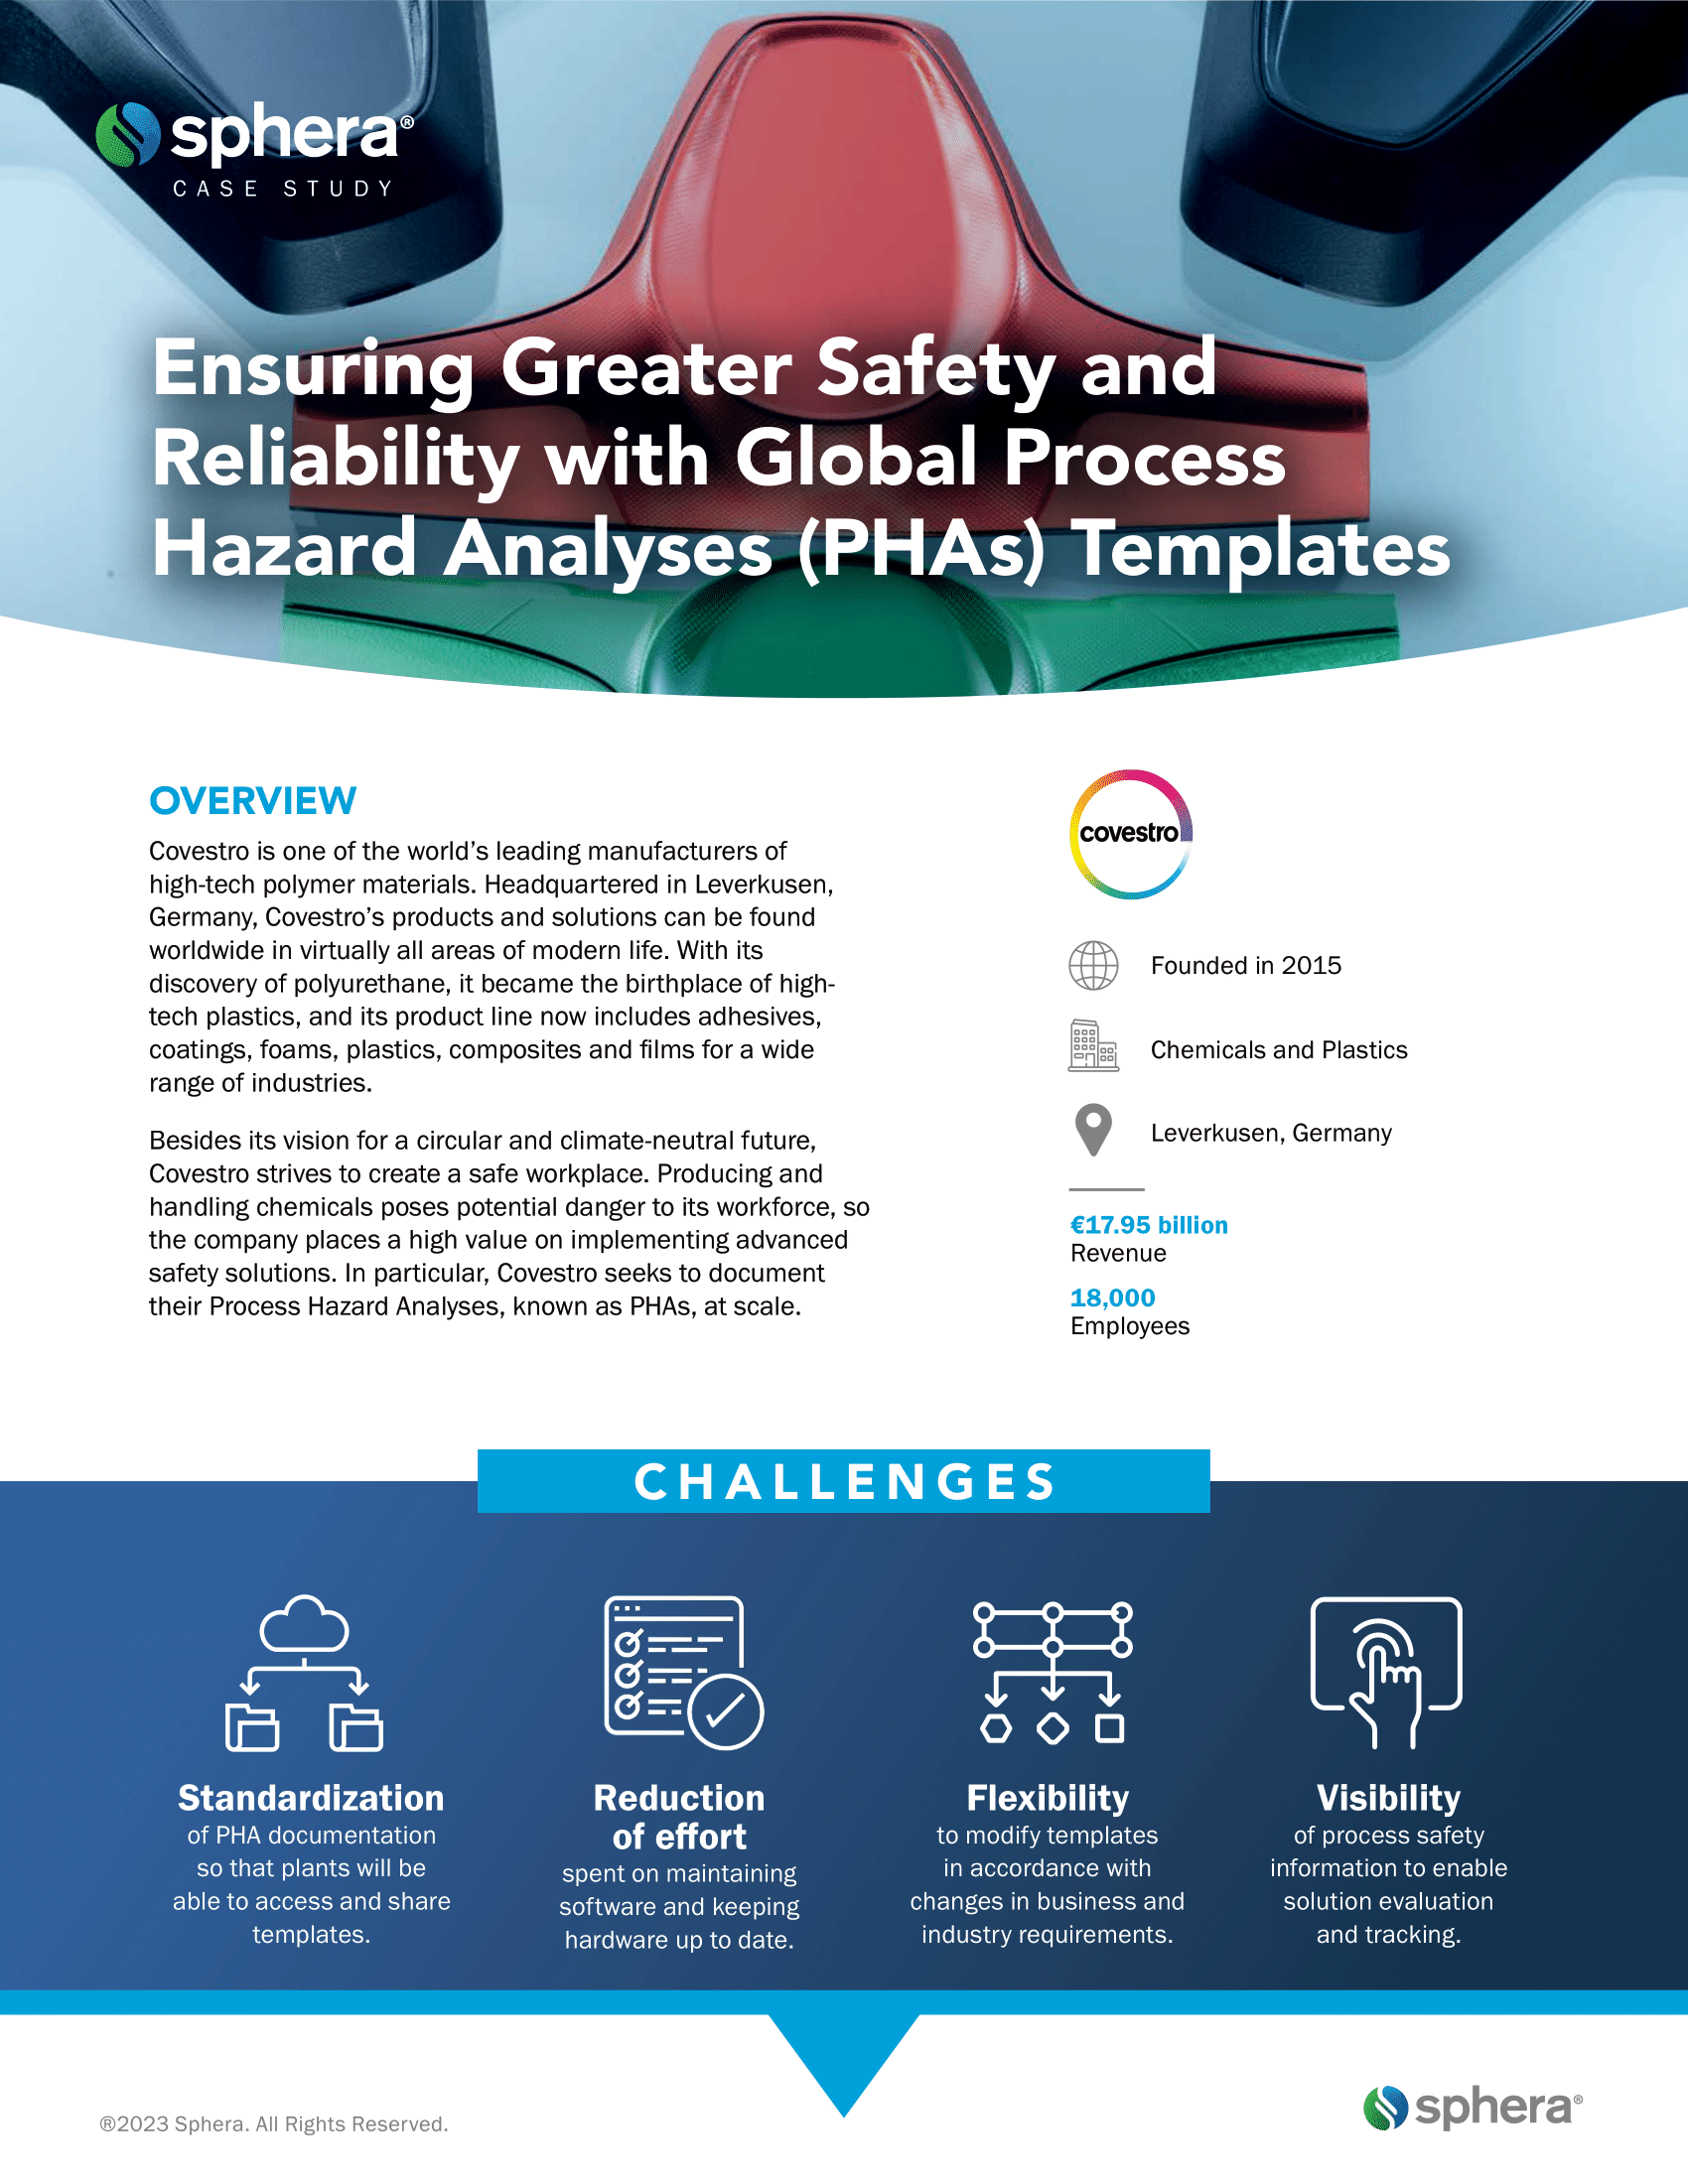 Ensuring Greater Safety and Reliability with Global Process Hazard Analyses (PHAs) Templates